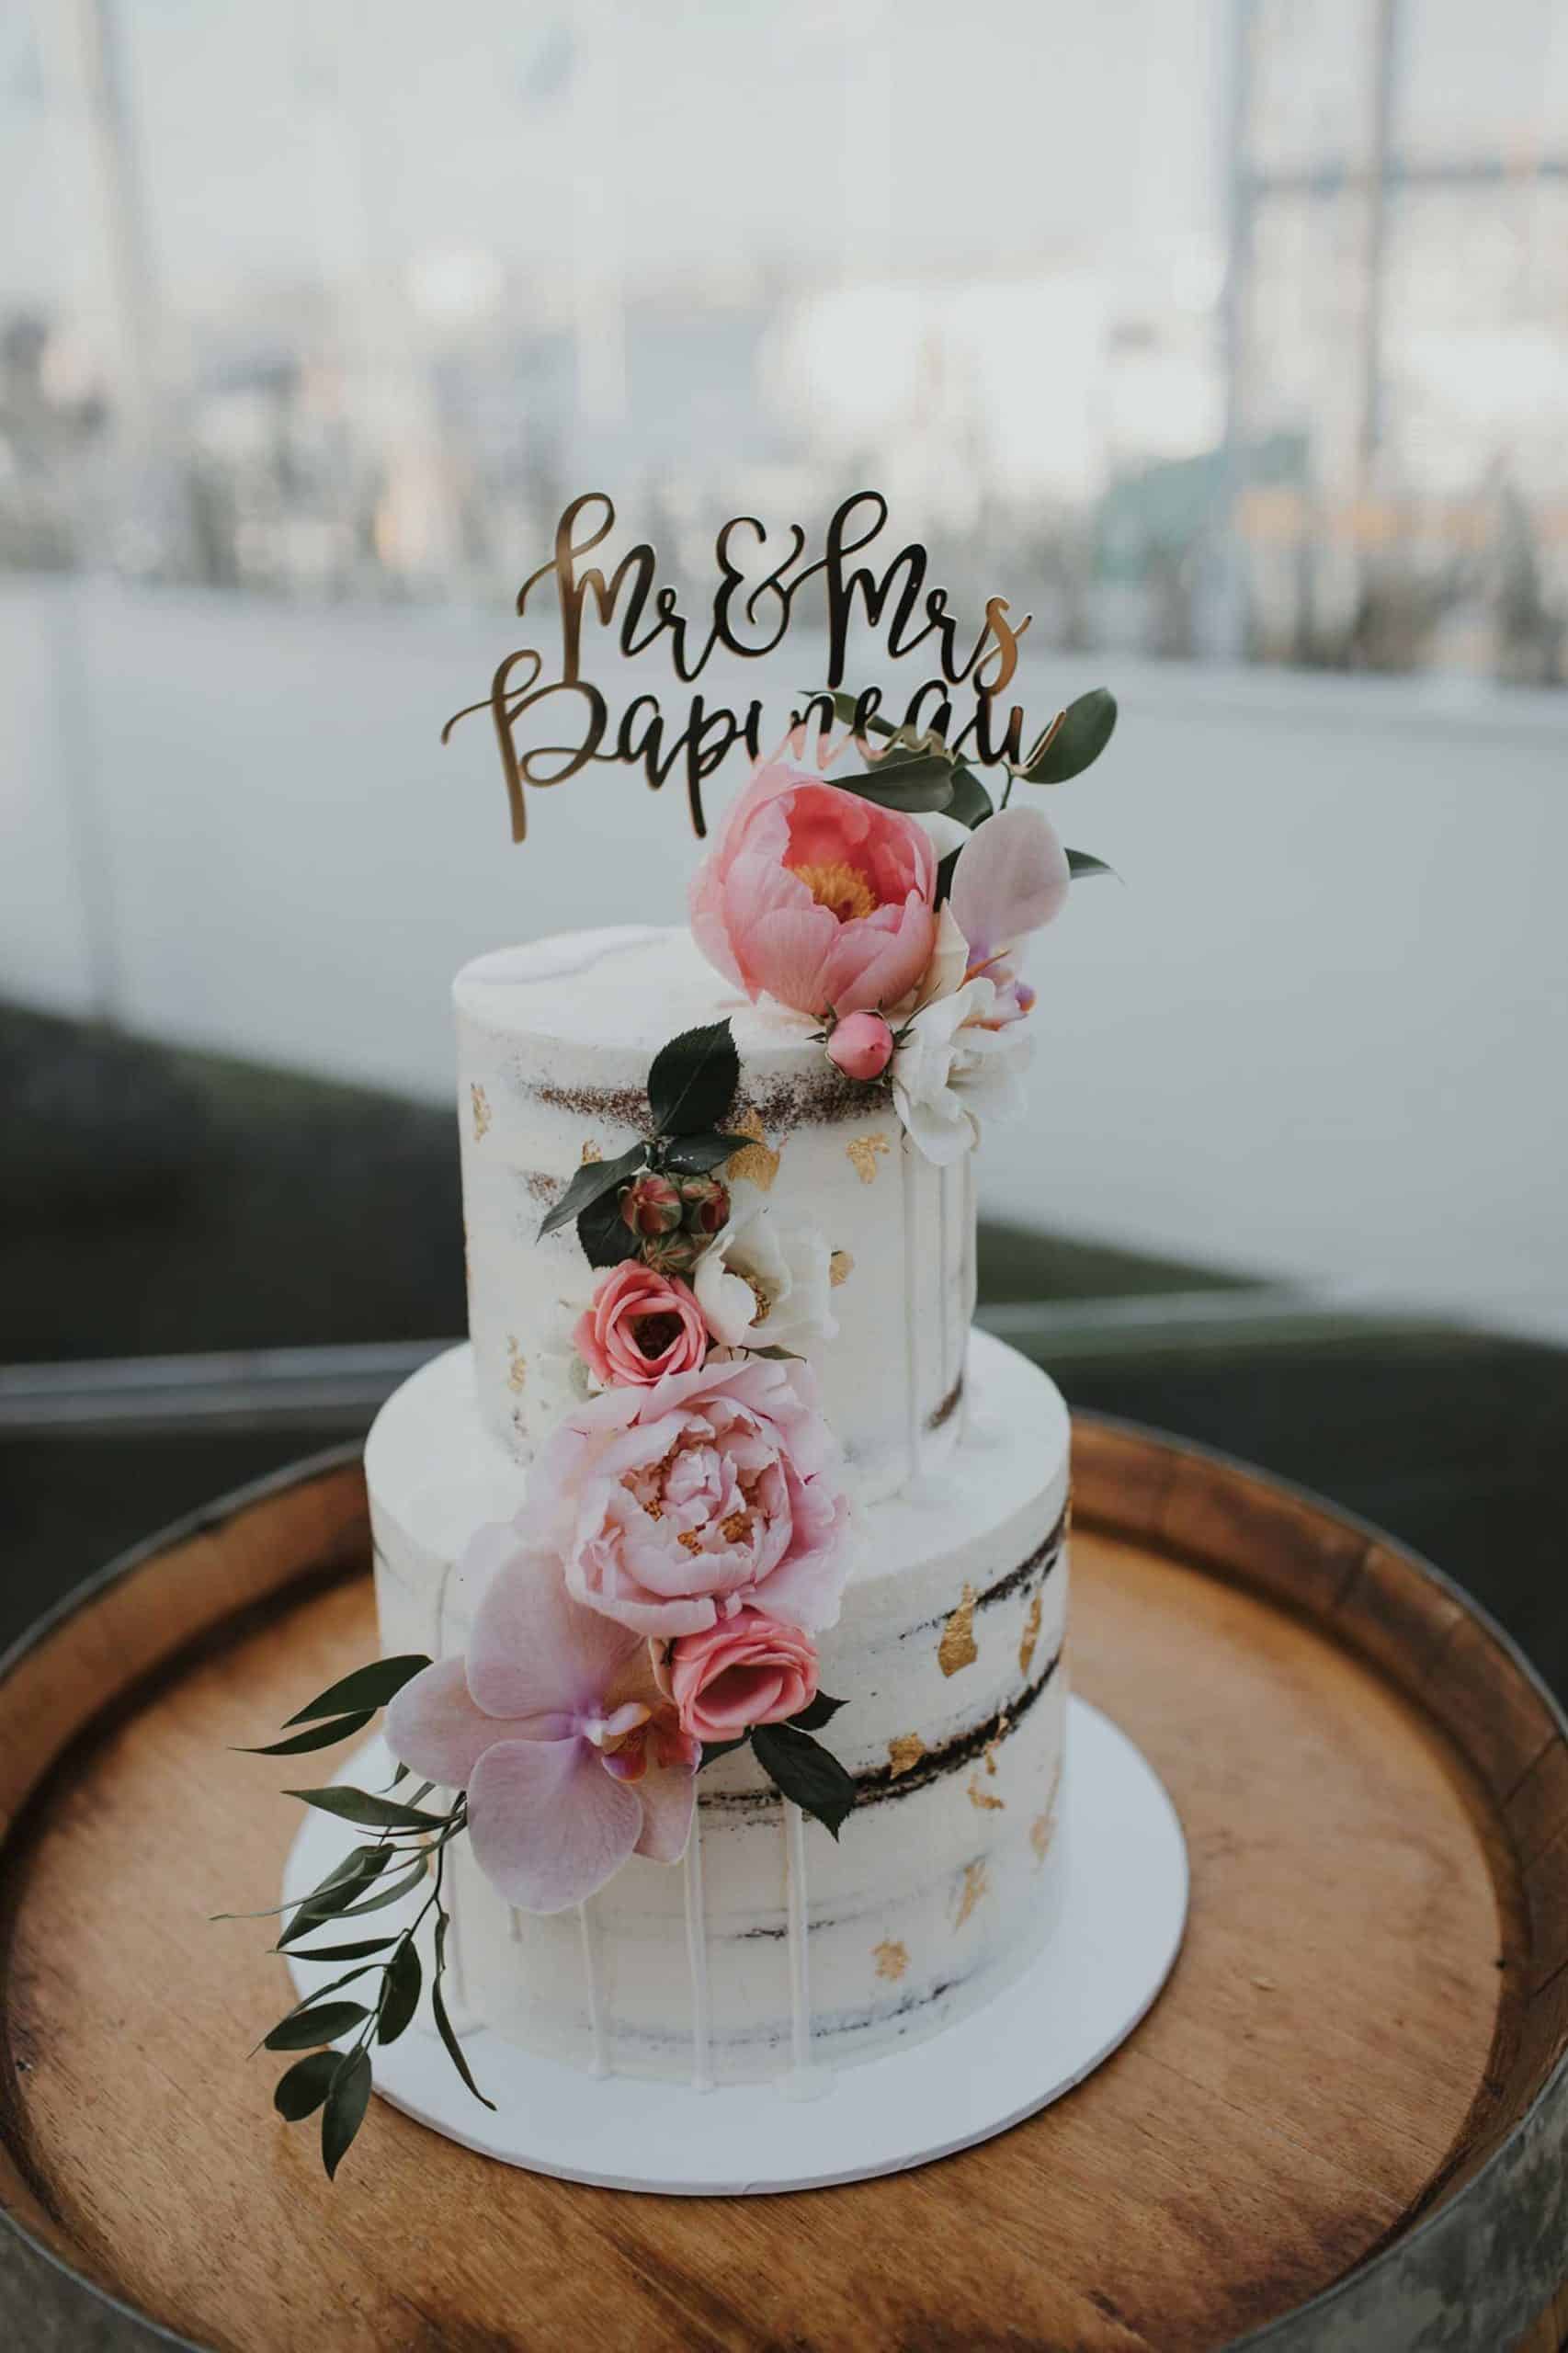 best wedding cakes of 2019 - simple cake with gold fleck and fresh flowers